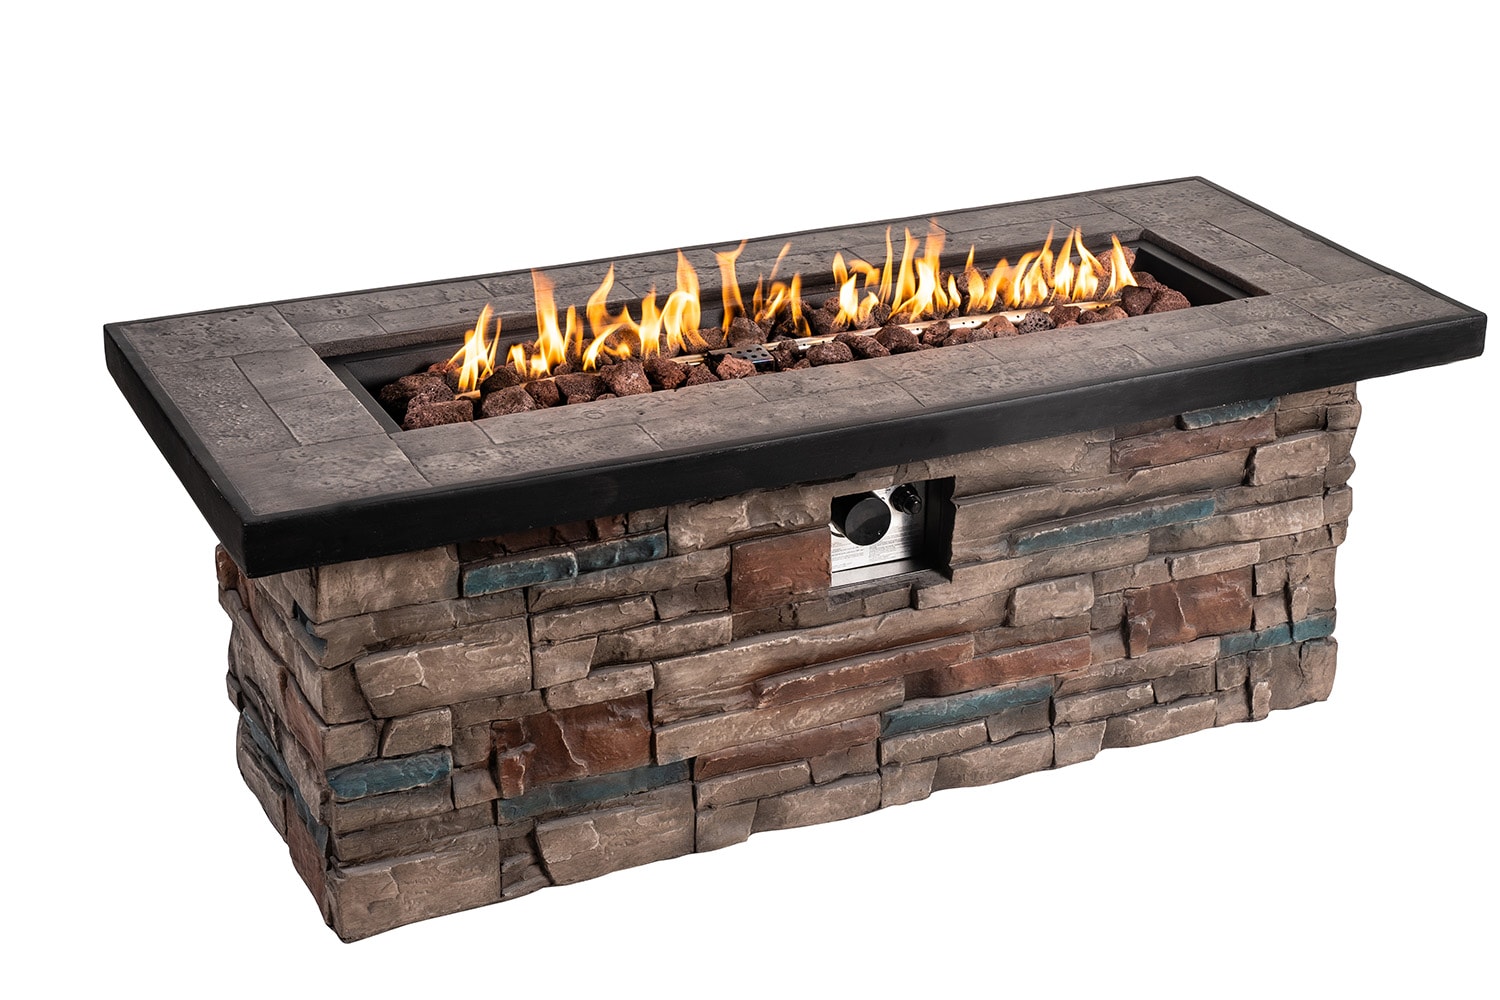 Concrete Propane Gas Fire Pit, How Many Btu Do I Need For A Fire Pit